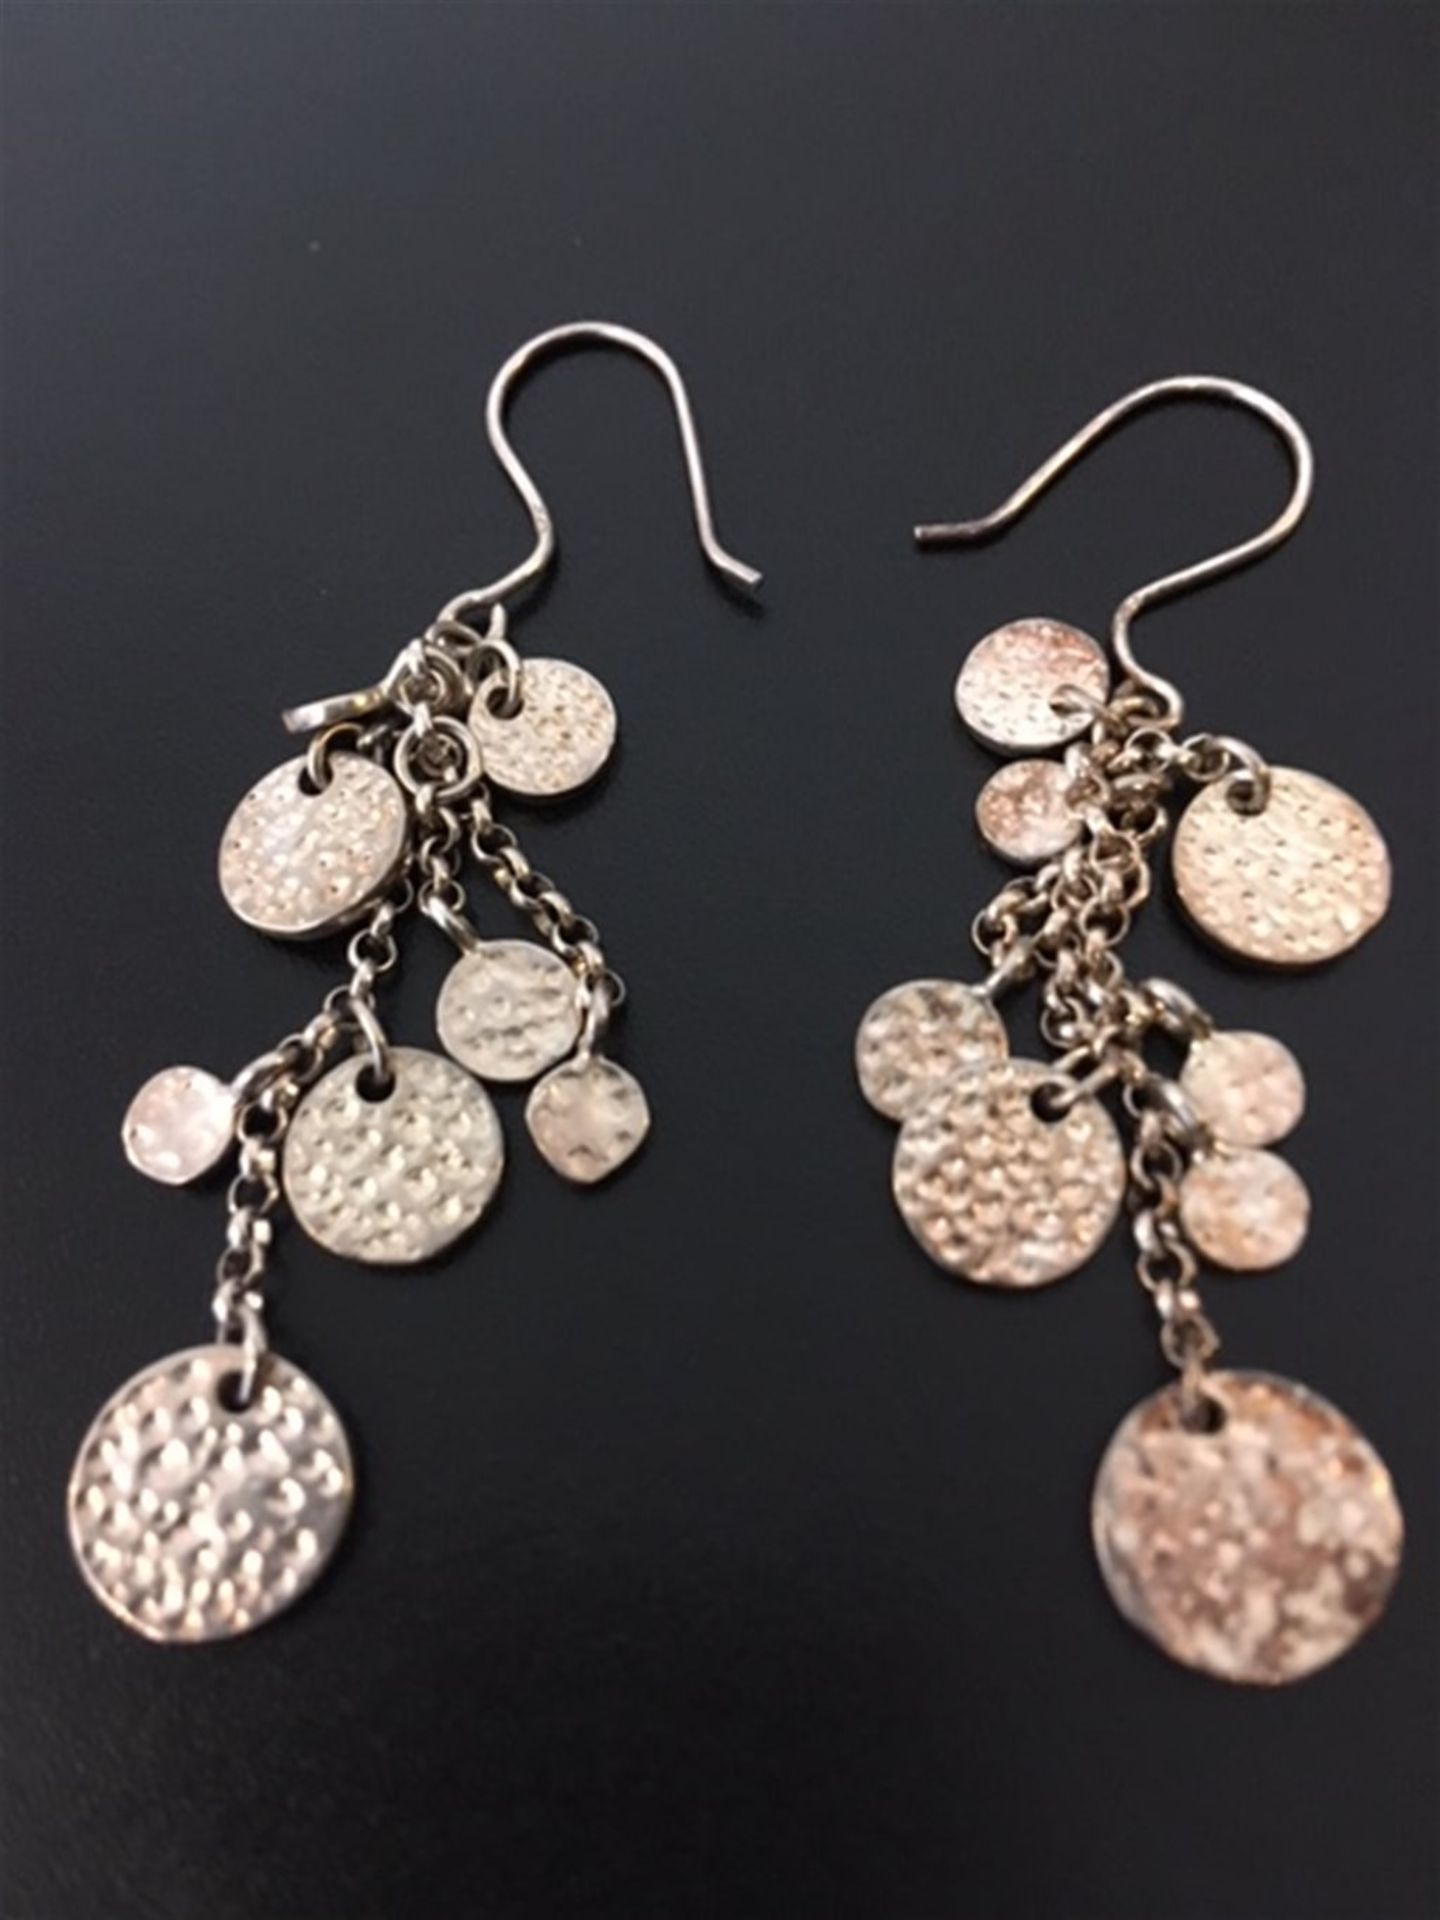 Silver pendant and matching earrings - Image 3 of 3